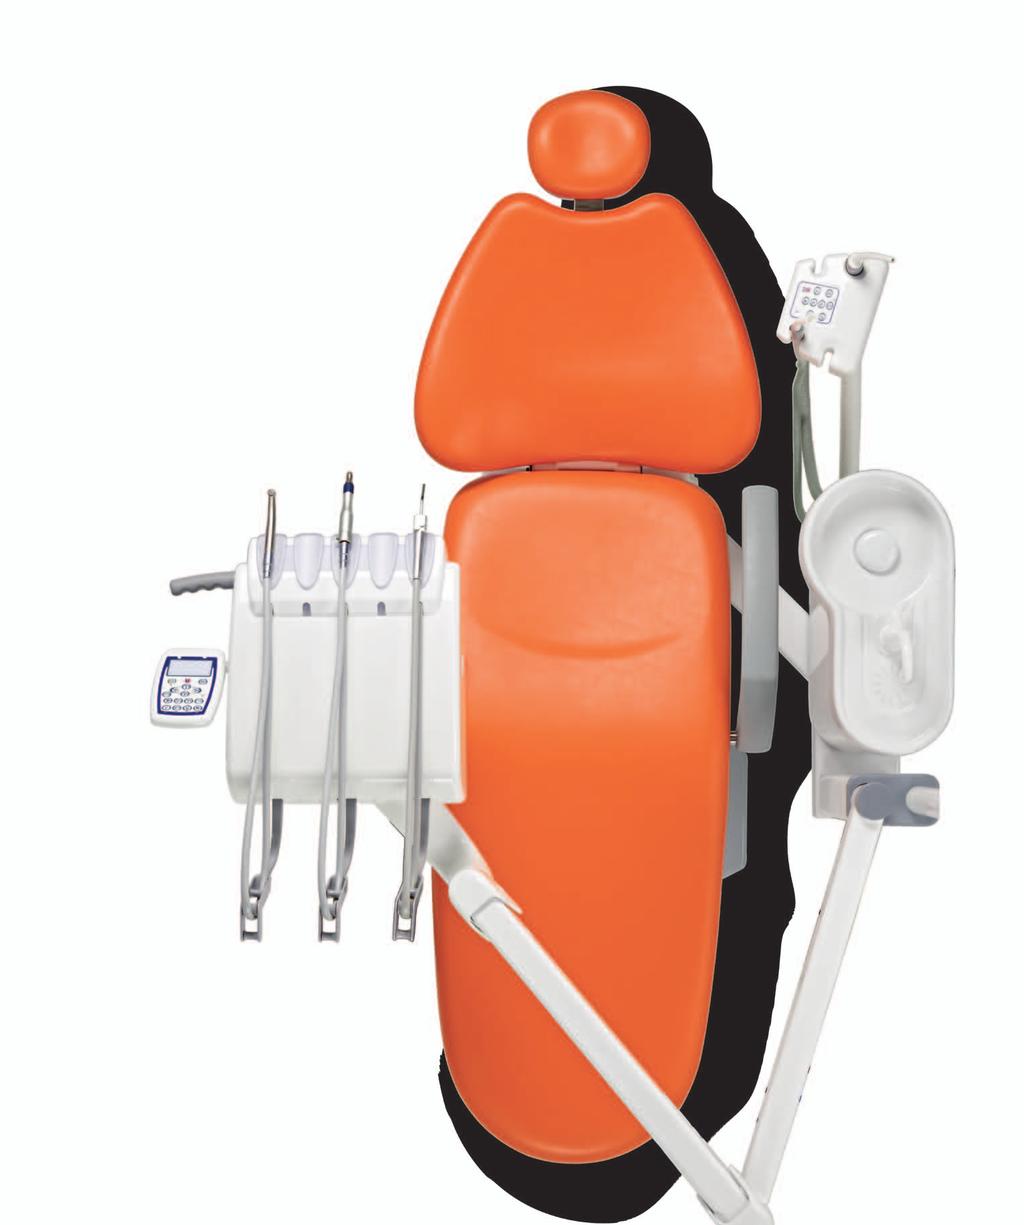 Designed to maximise patient comfort, the electro-mechanically moved patient chair, with adjustable headrest